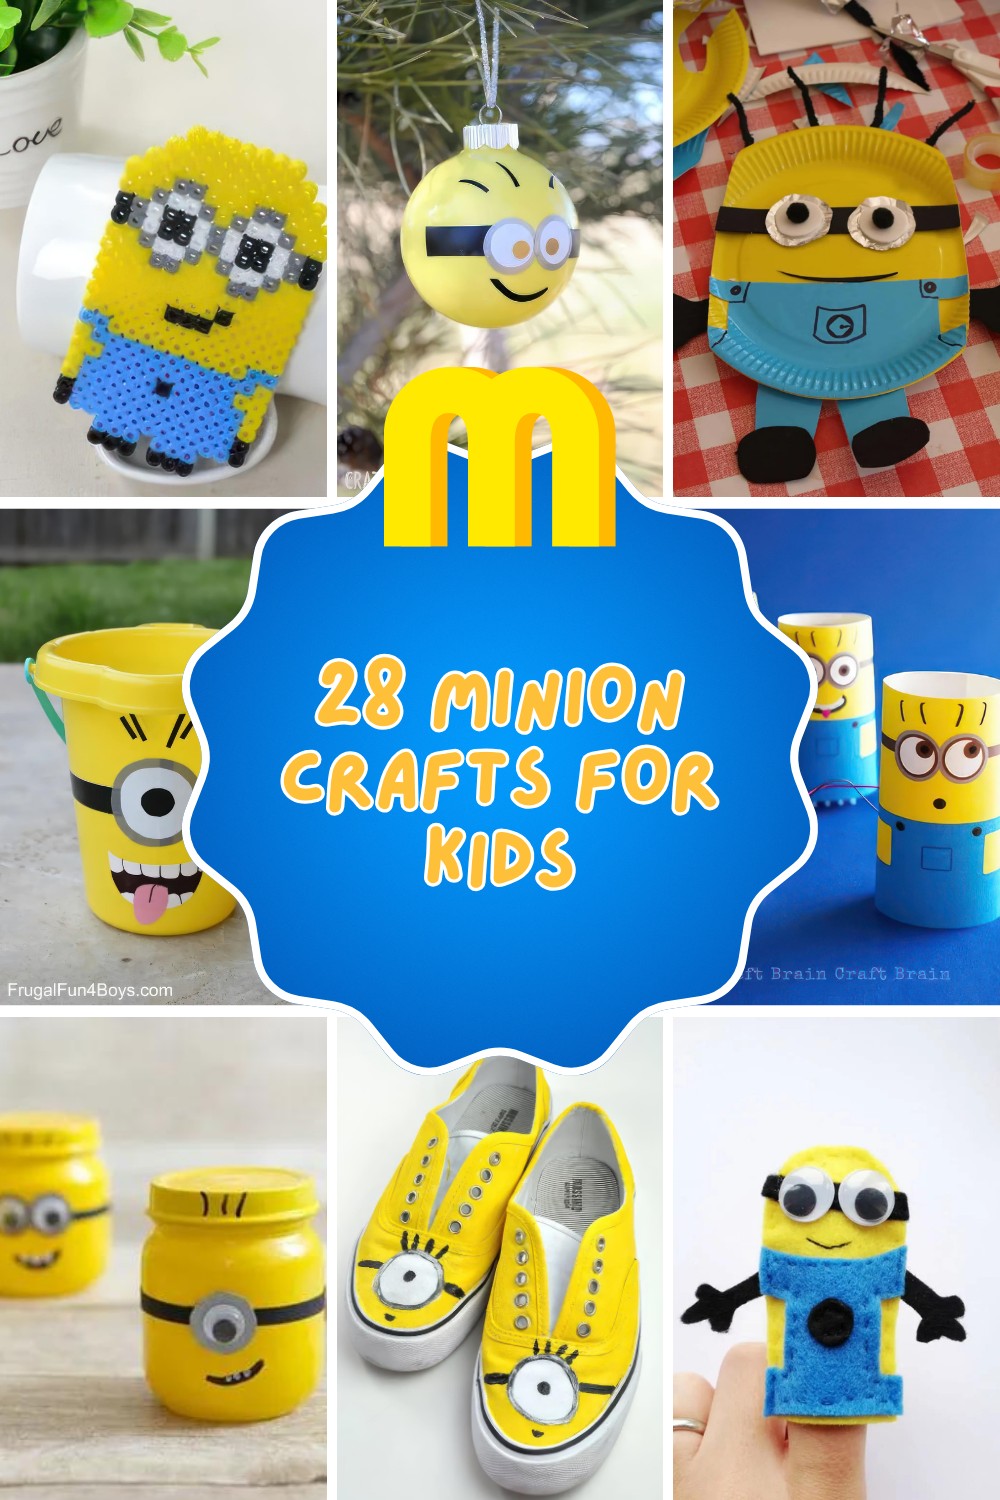 Get ready for some Minion madness! With Despicable Me 4 taking over the screens, your kids will love these fun and easy Minion crafts. Perfect for keeping little hands busy and bringing smiles to their faces. Let's get crafty! 🥳✨ #MinionCrafts #KidsActivities #DIYFun